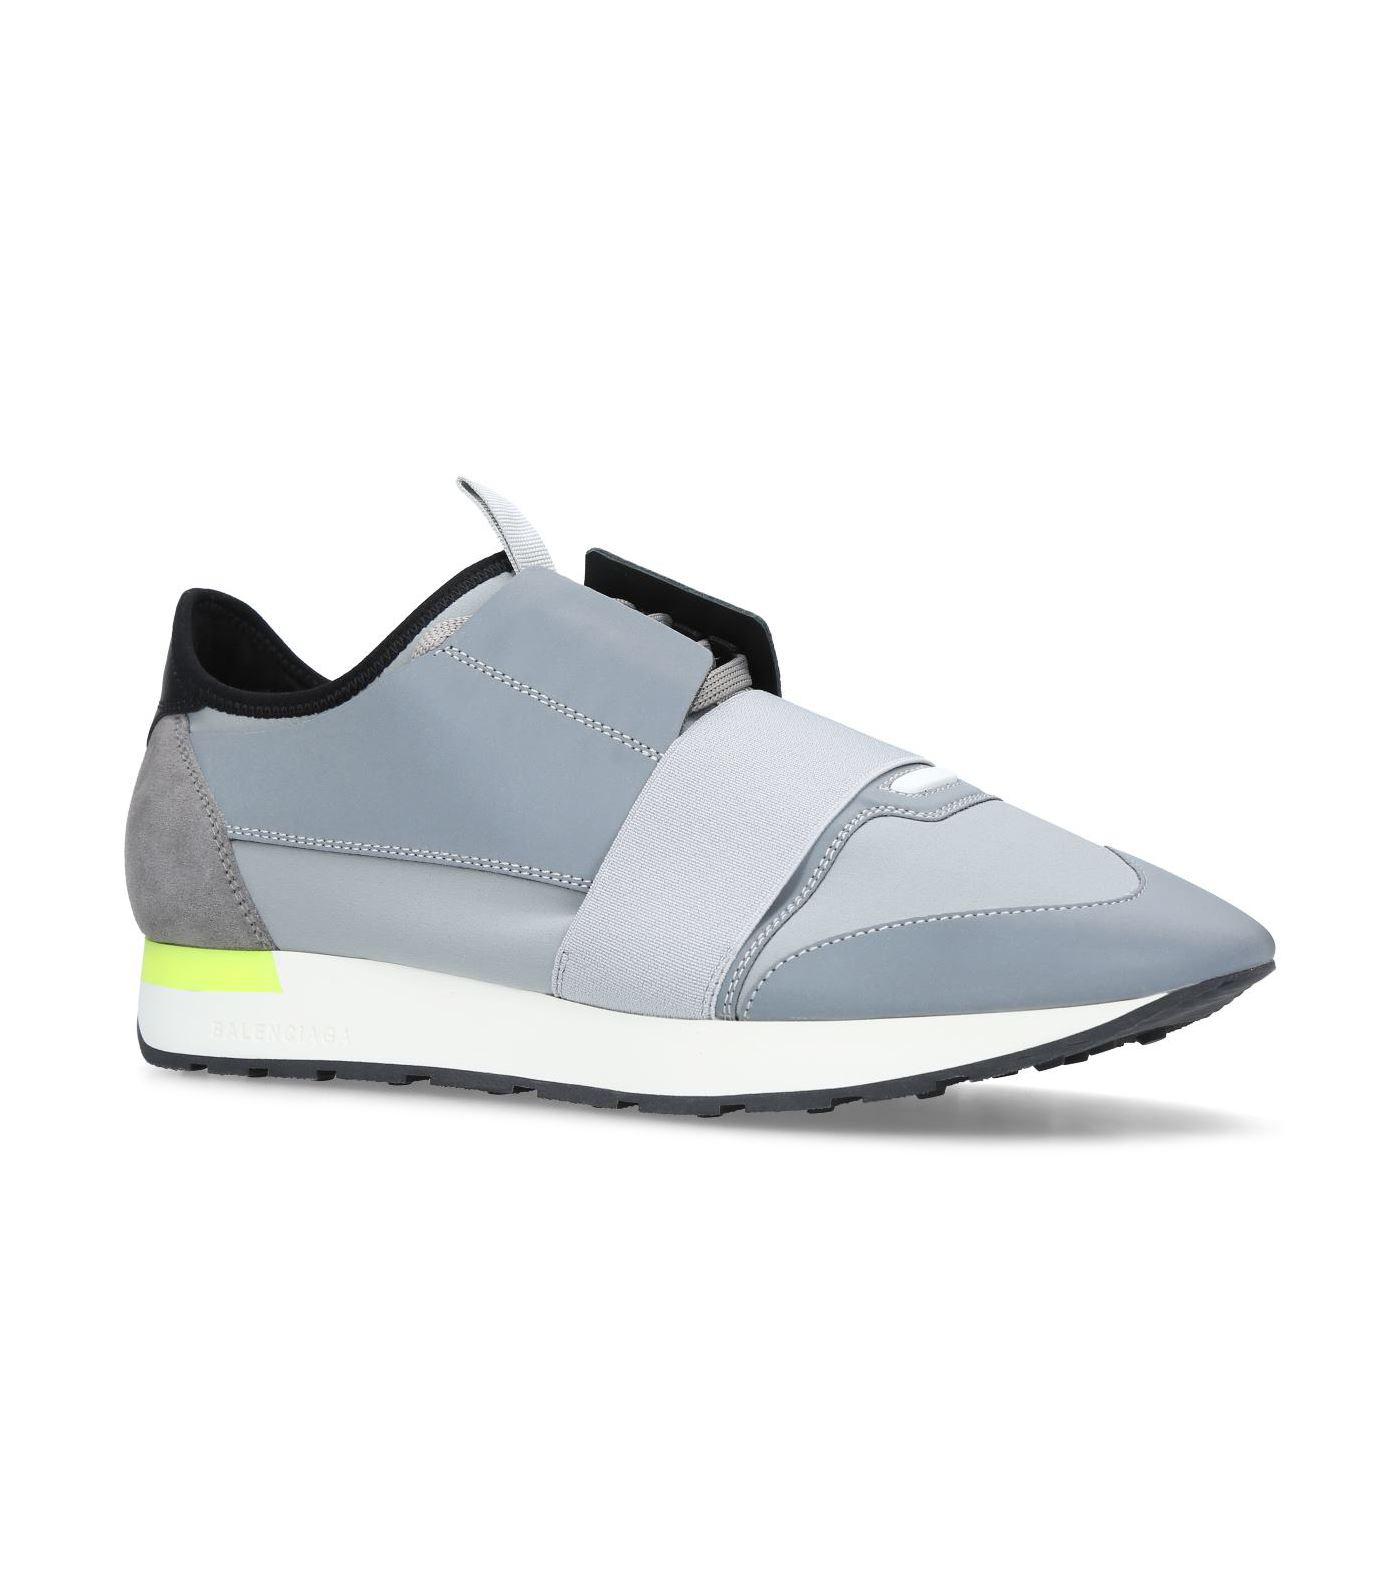 balenciaga elastic runners - OFF-64% >Free Delivery